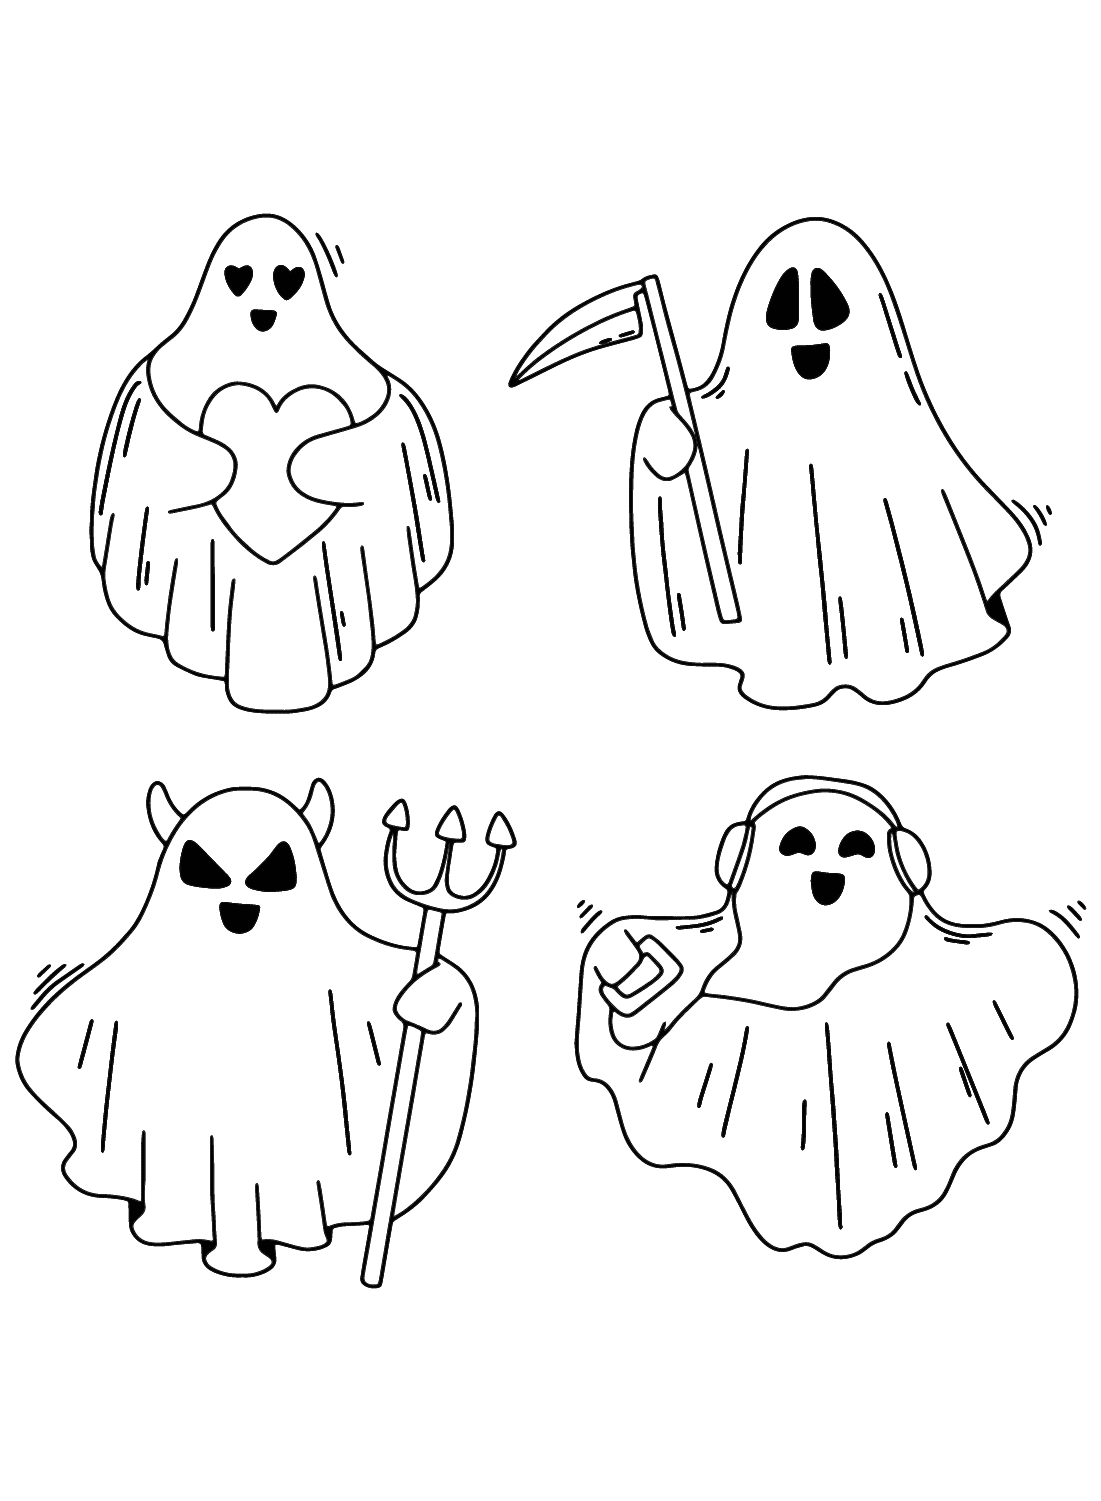 Ghost Printable Coloring Page from Ghost